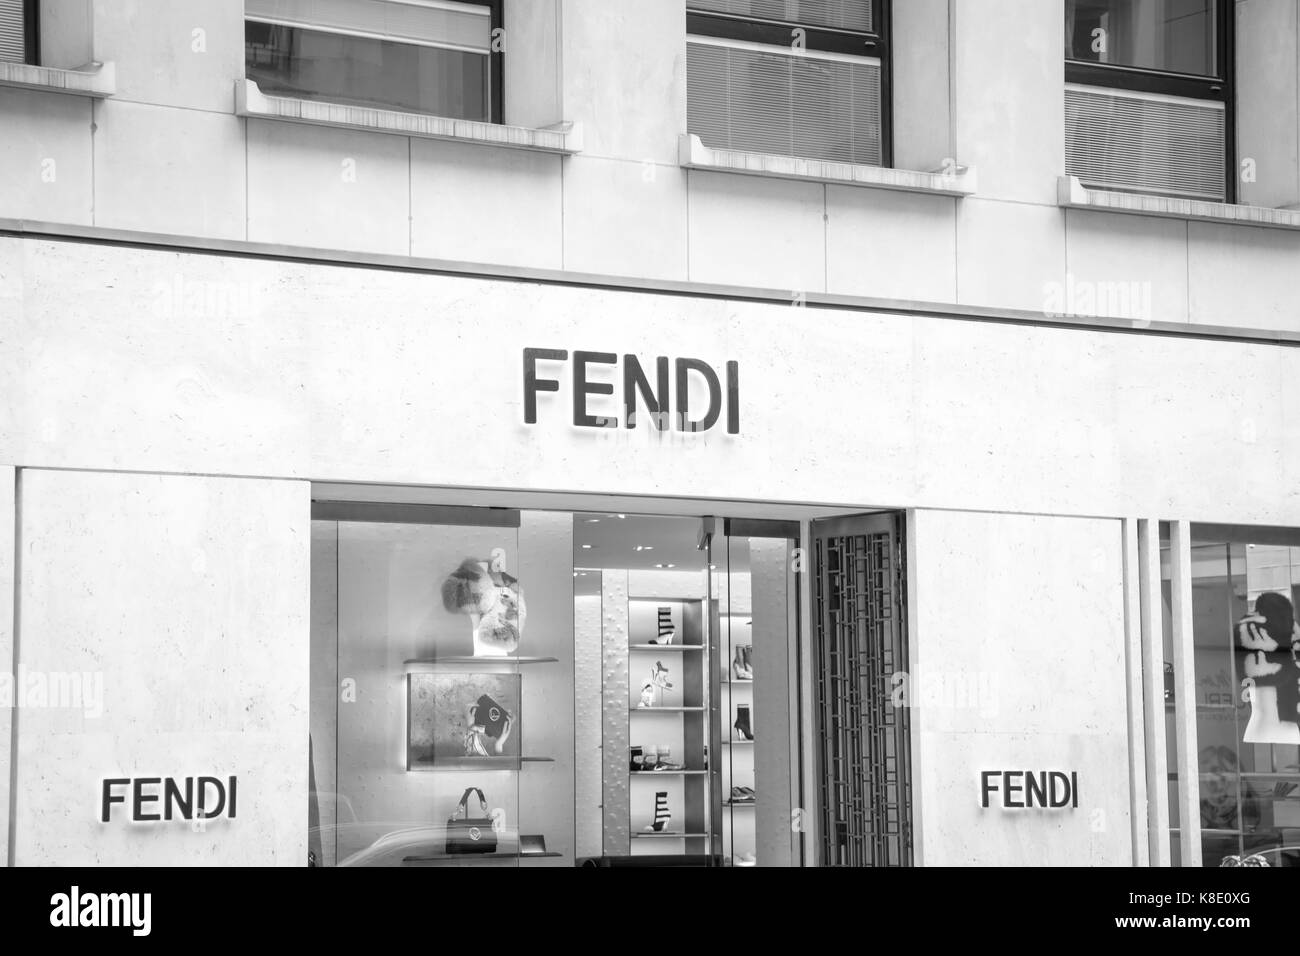 The fendi building Black and White Stock Photos & Images - Alamy